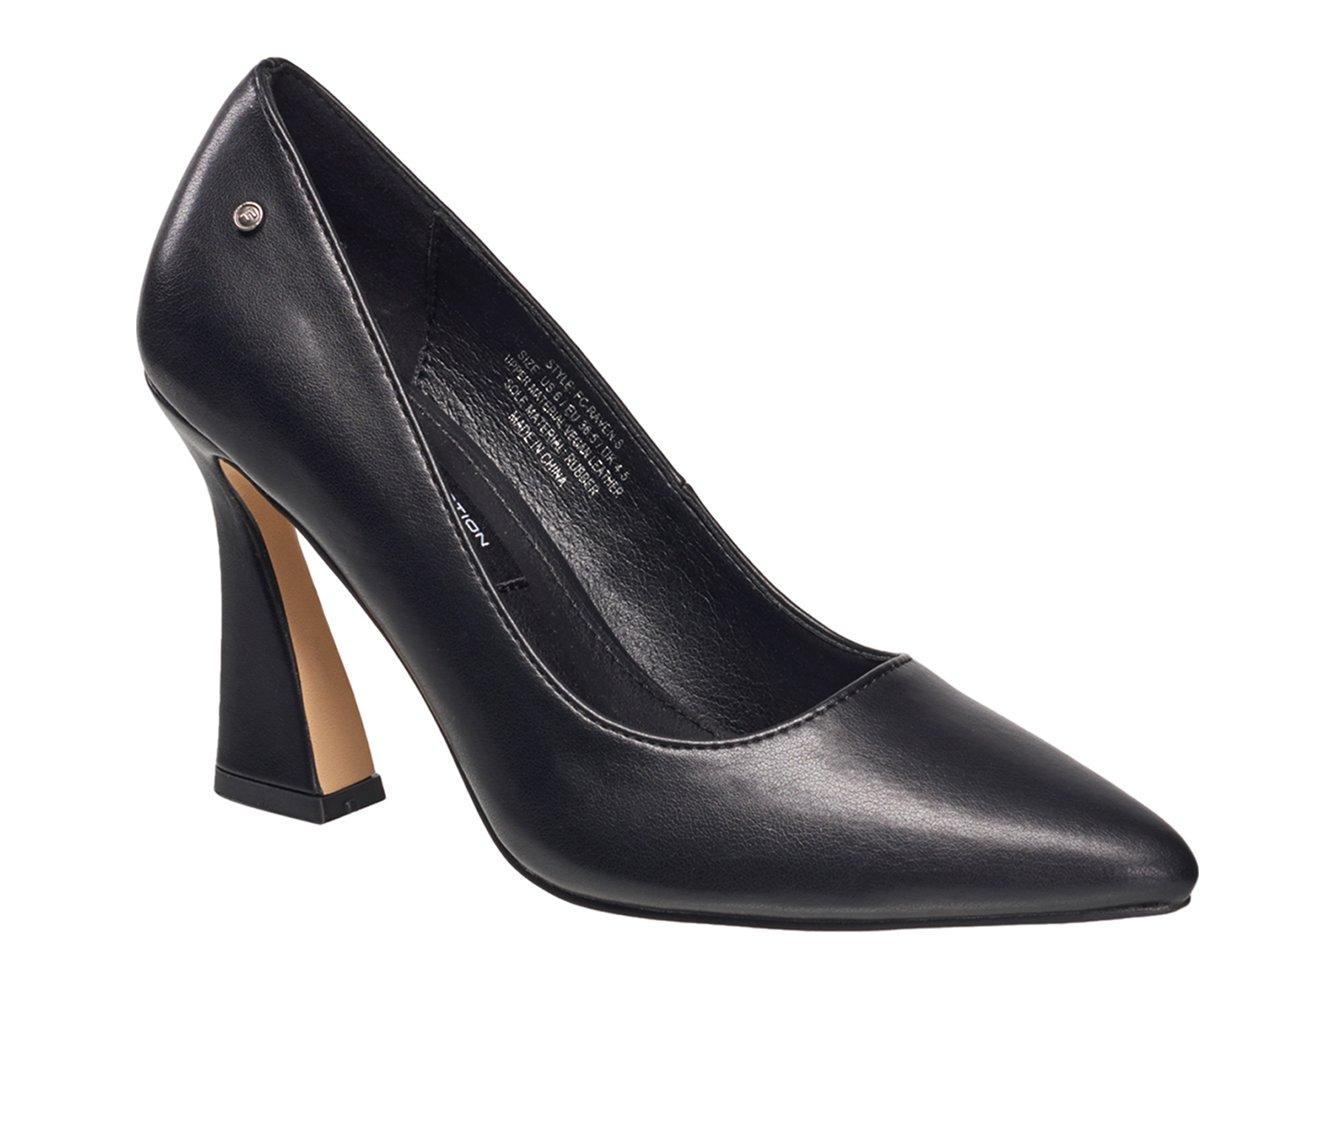 Women's French Connection Raven Pumps